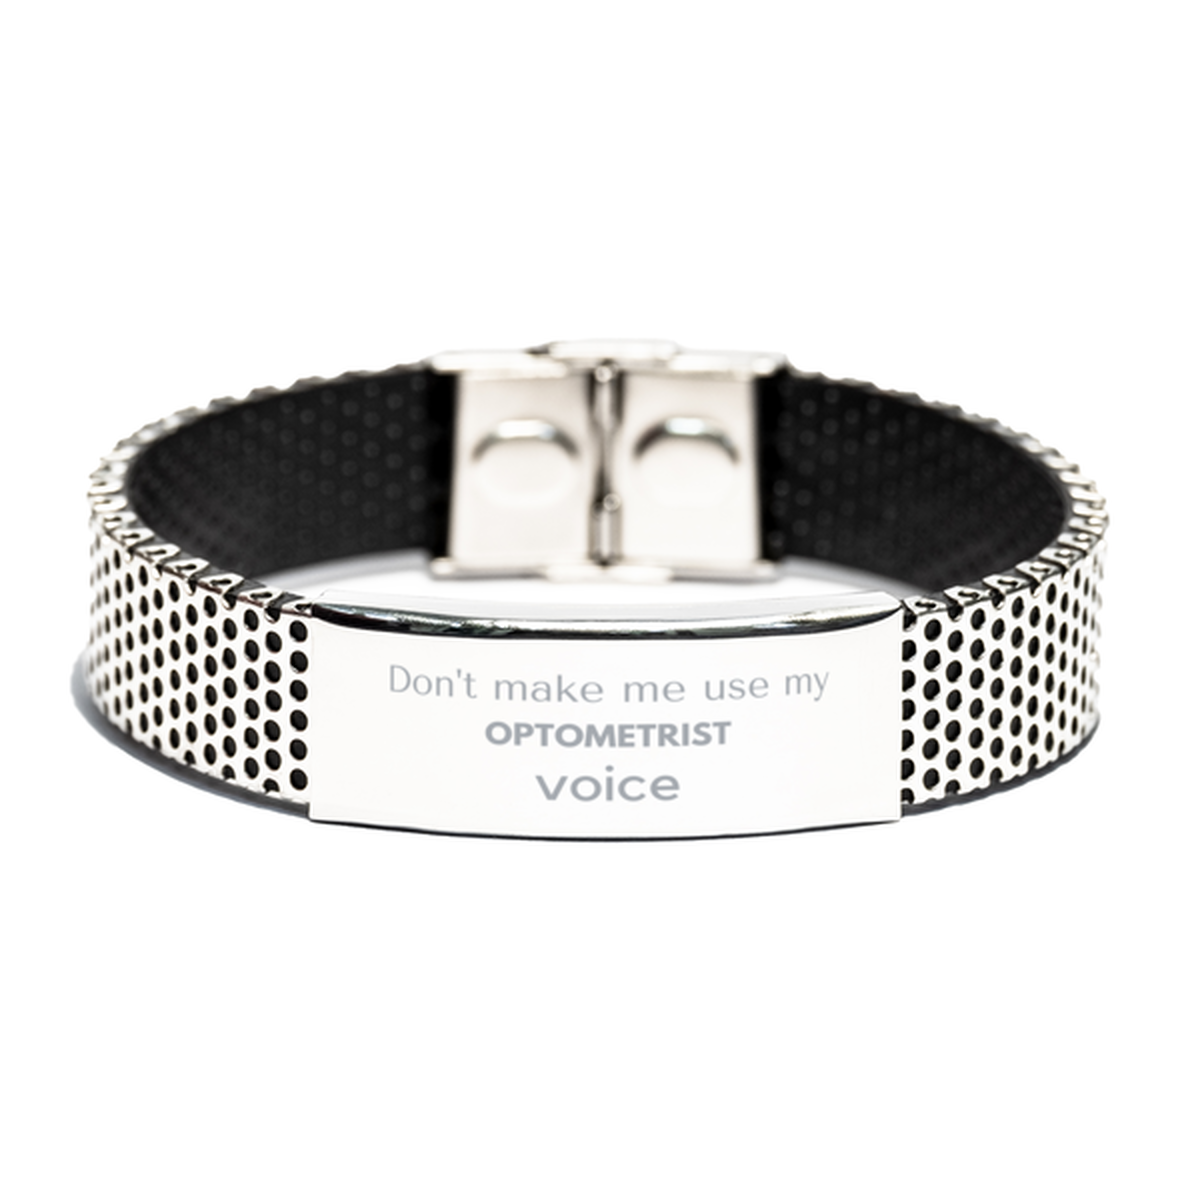 Don't make me use my Optometrist voice, Sarcasm Optometrist Gifts, Christmas Optometrist Stainless Steel Bracelet Birthday Unique Gifts For Optometrist Coworkers, Men, Women, Colleague, Friends